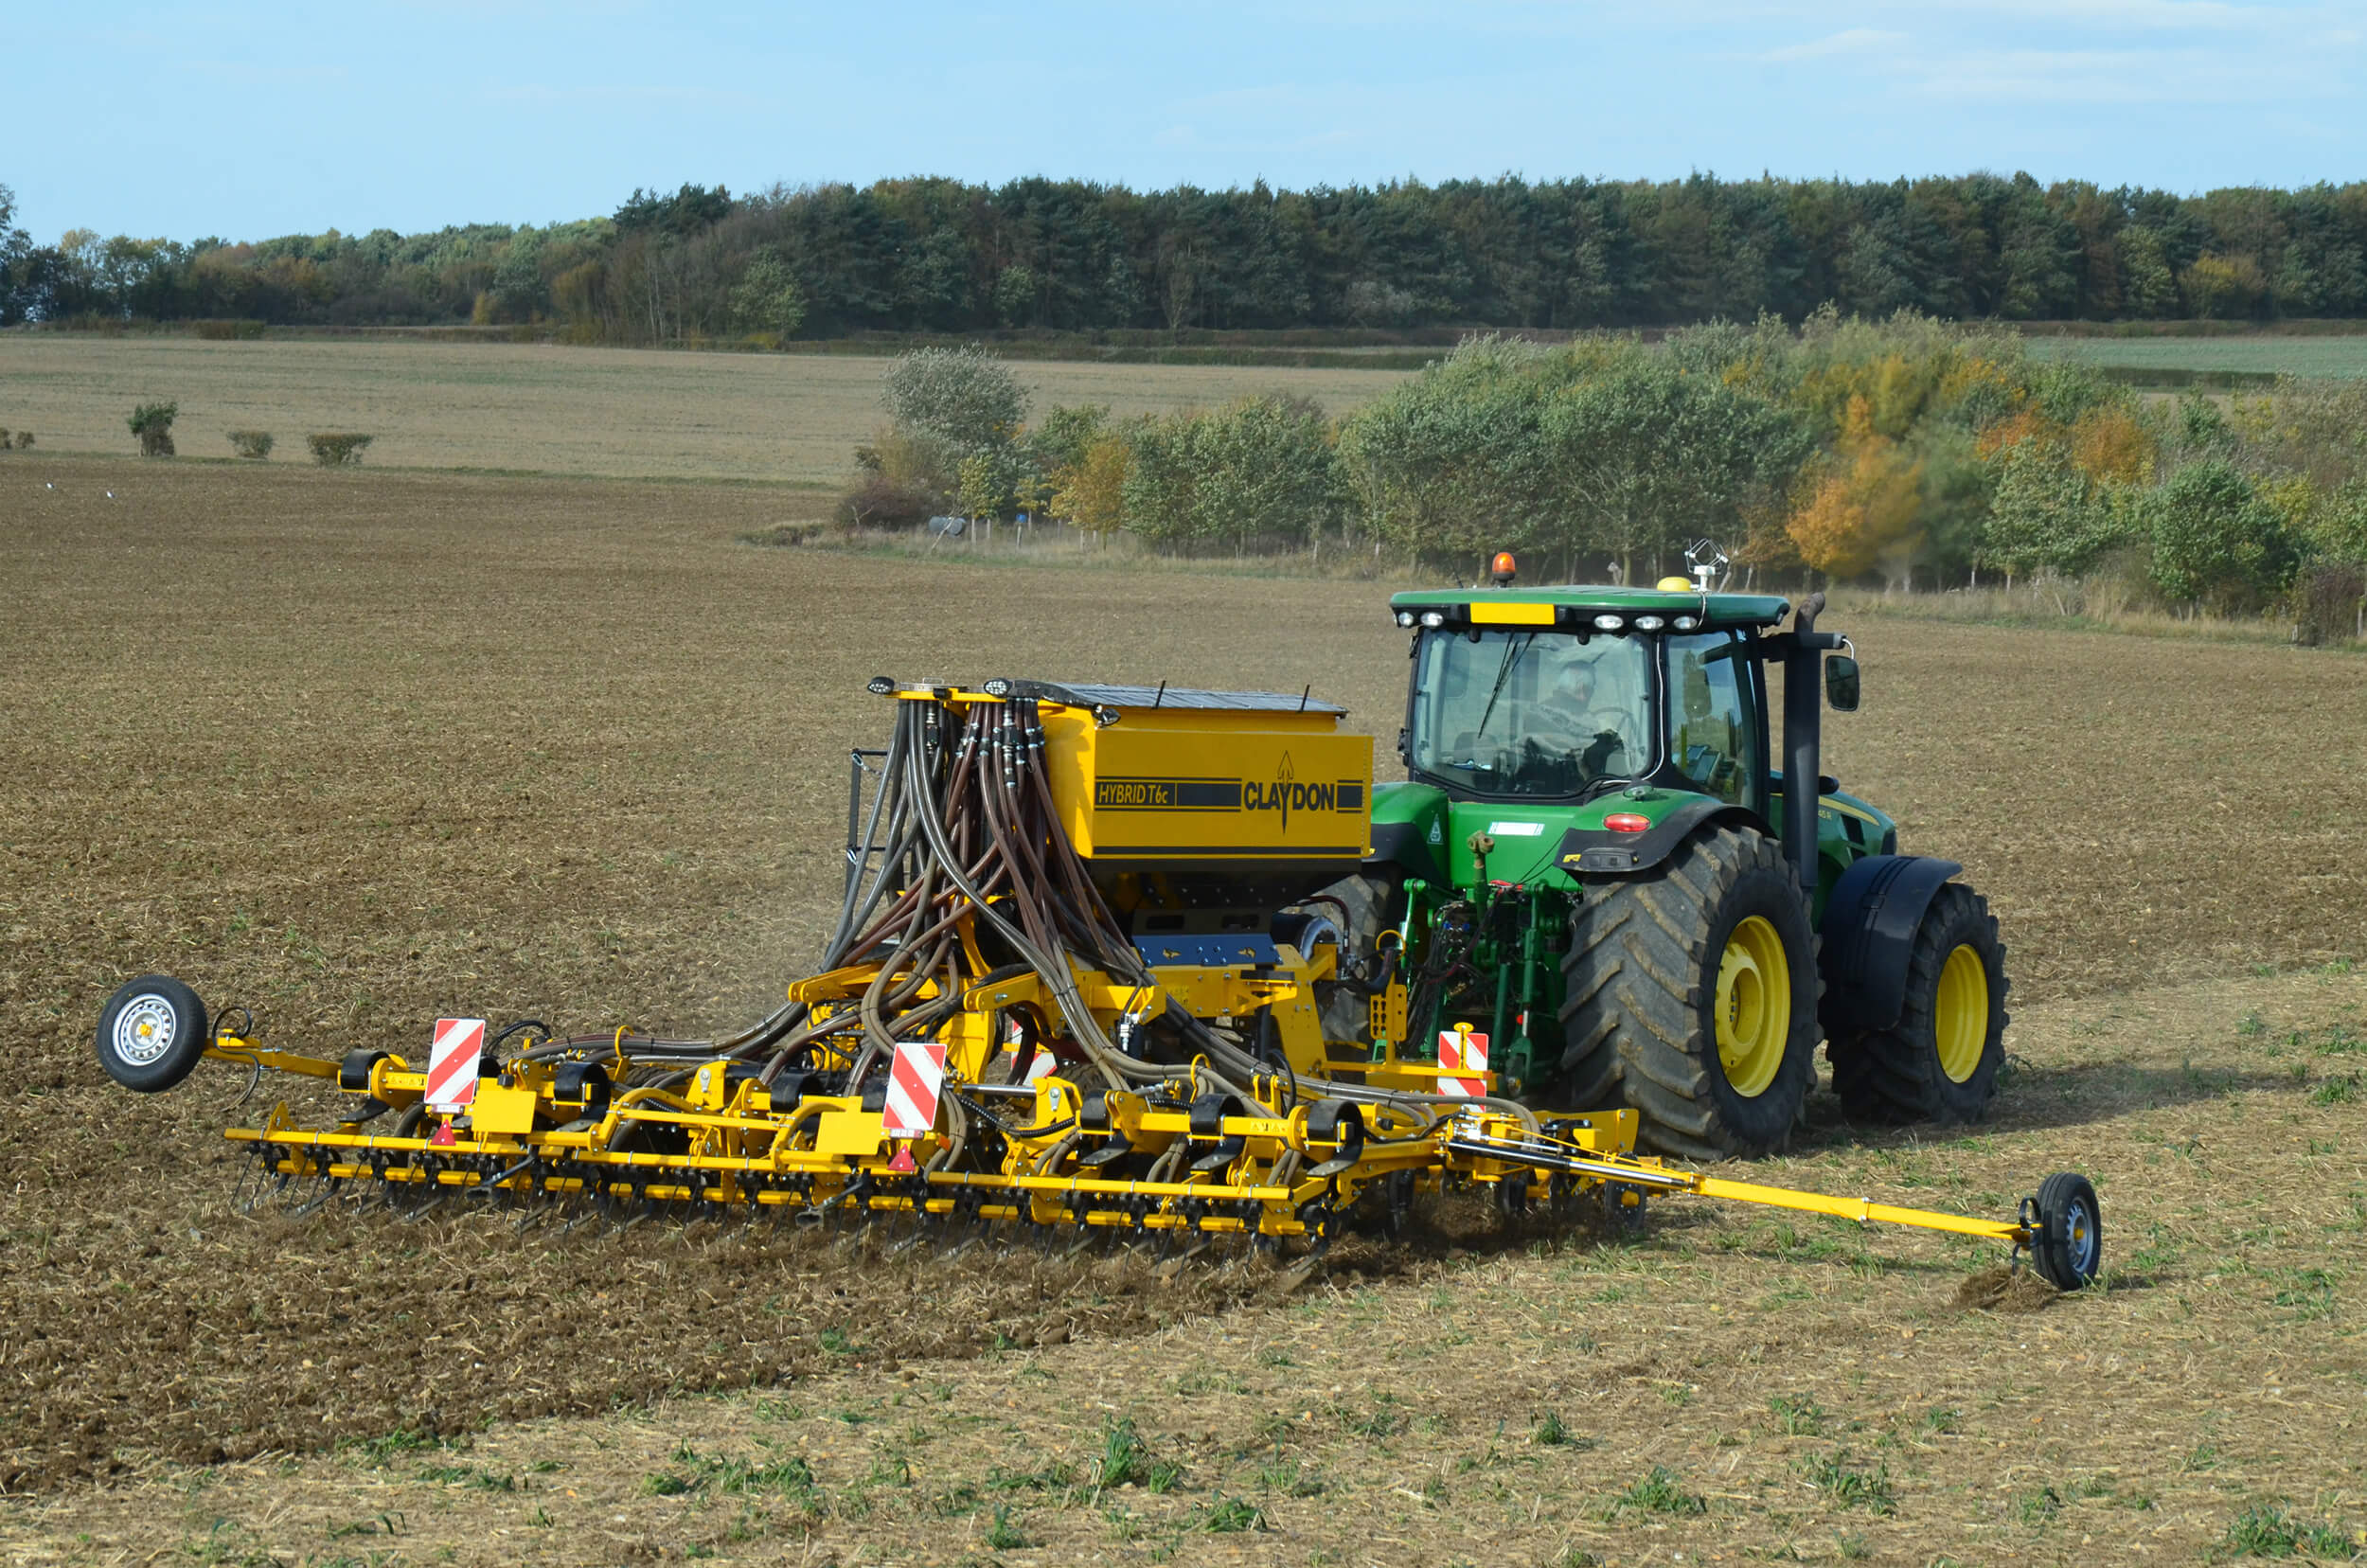 HYBRID T – TRAILED DRILL is drilling the soil